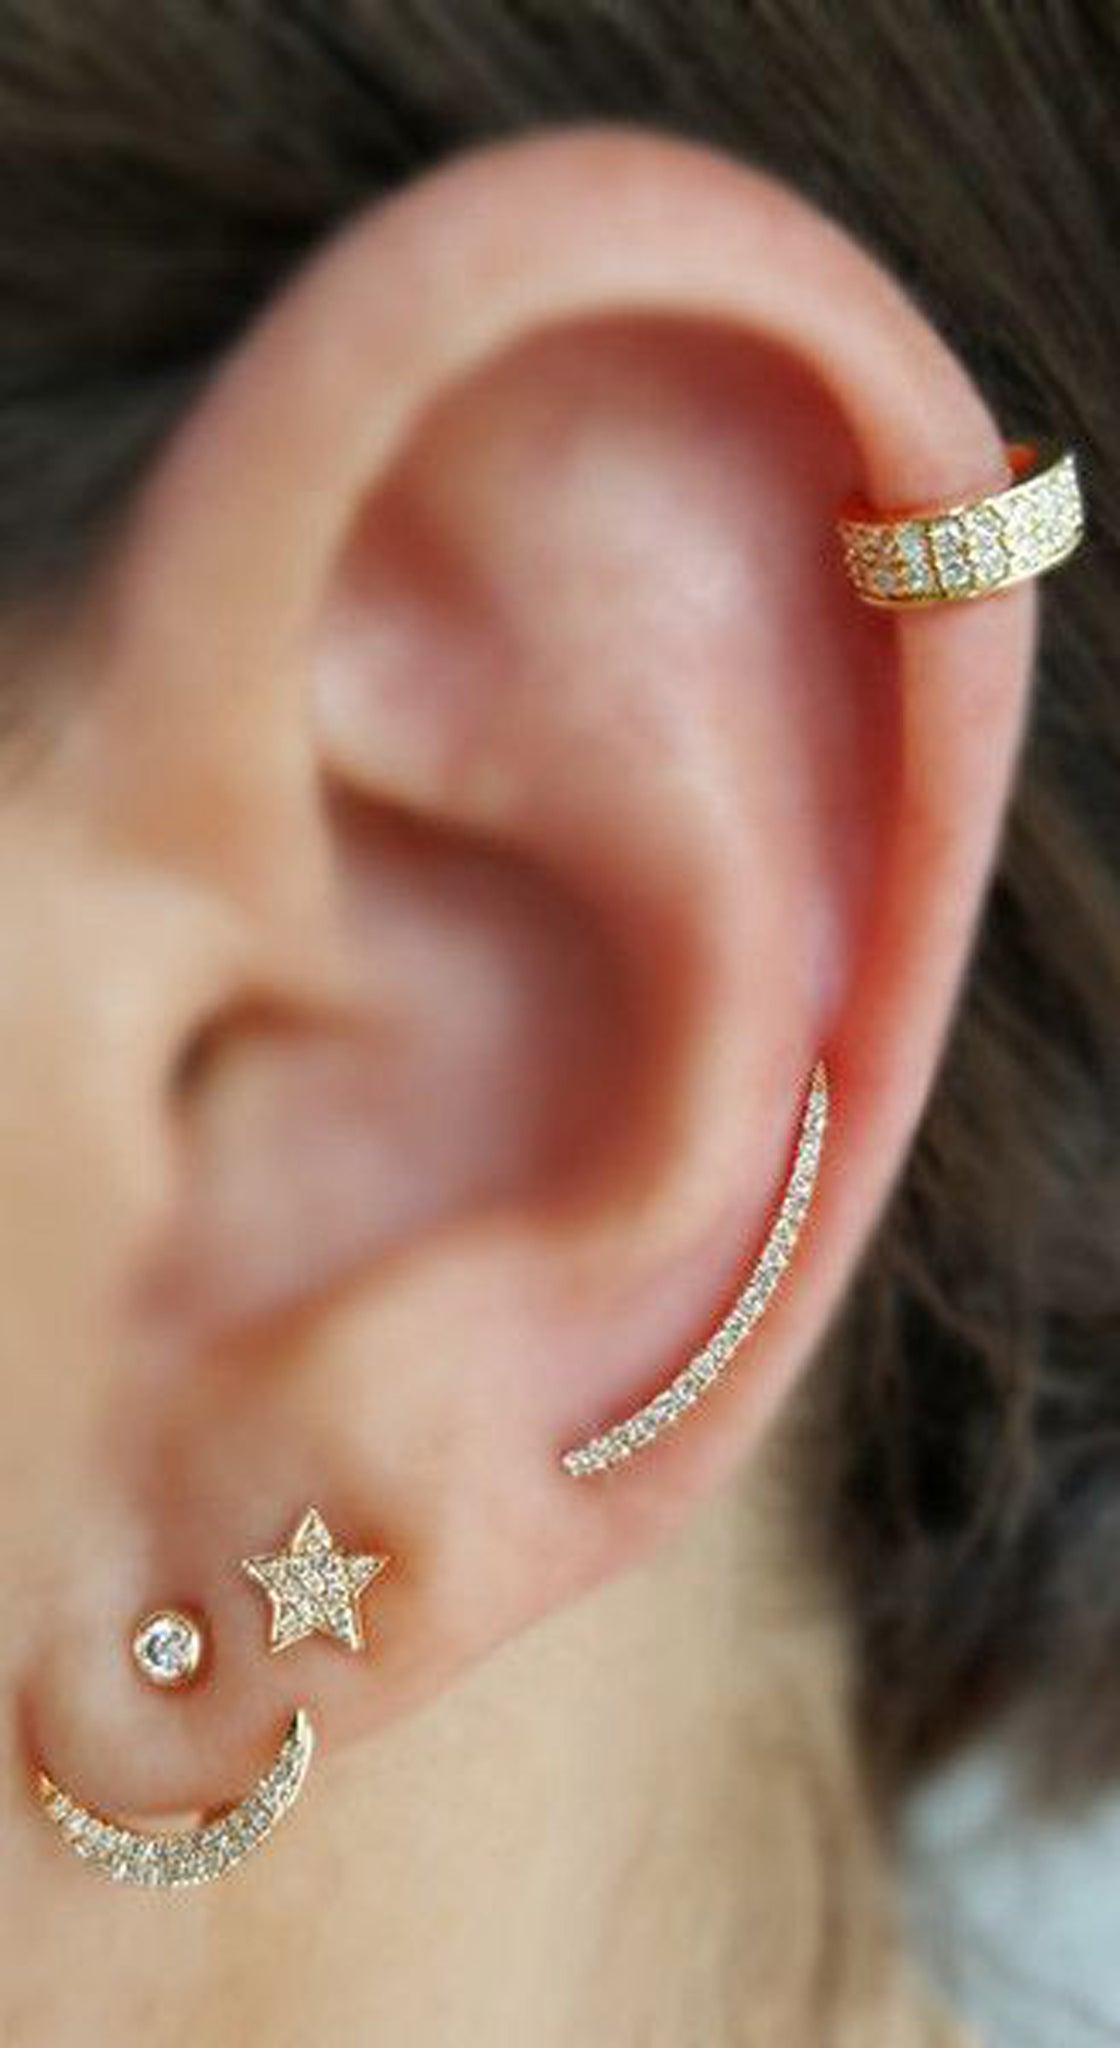 Classy Gold Ear Piercing Jewelry Ideas Combinations at MyBodiArt.com - Single Cartilage Crystal Ring - Ear Climber Earring -  Star Crescent Moon